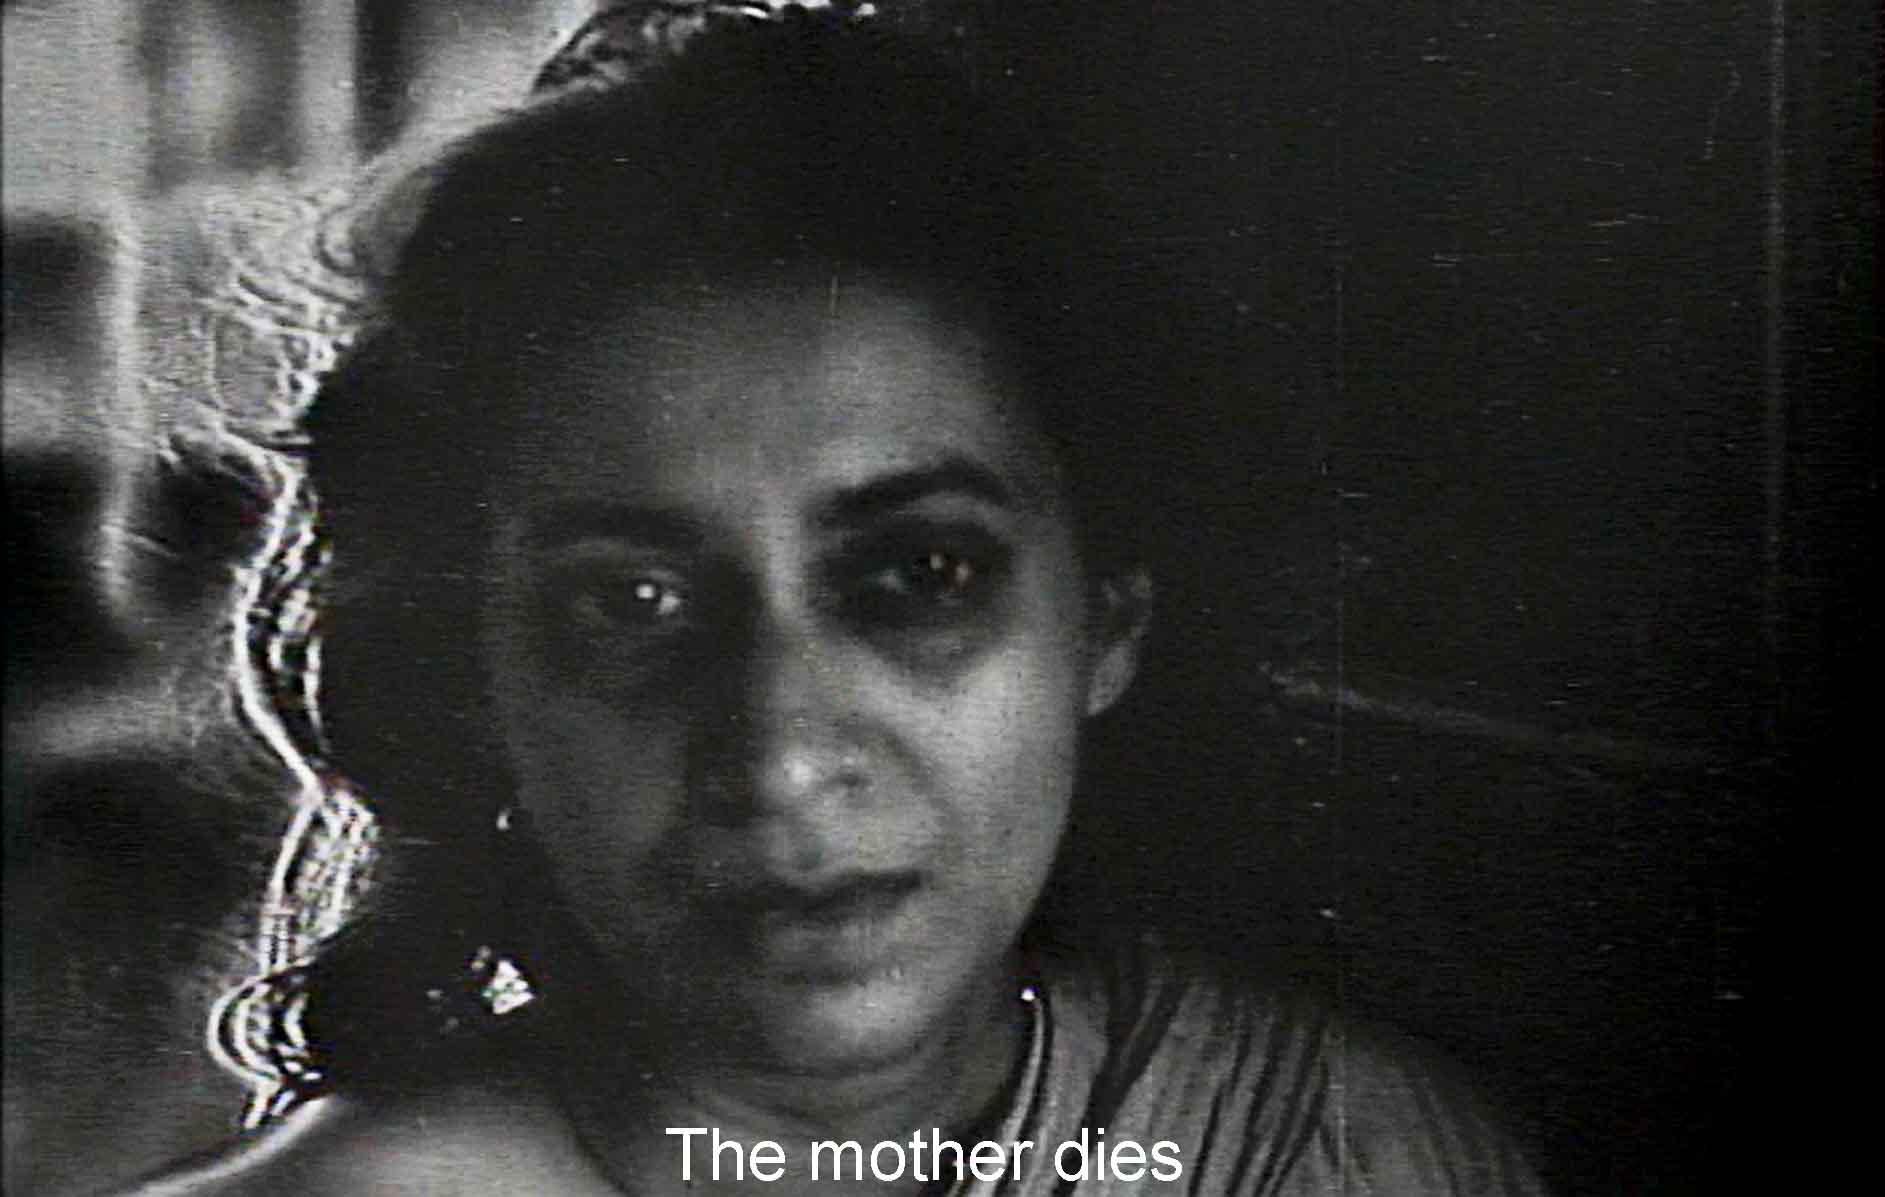 The mother dies